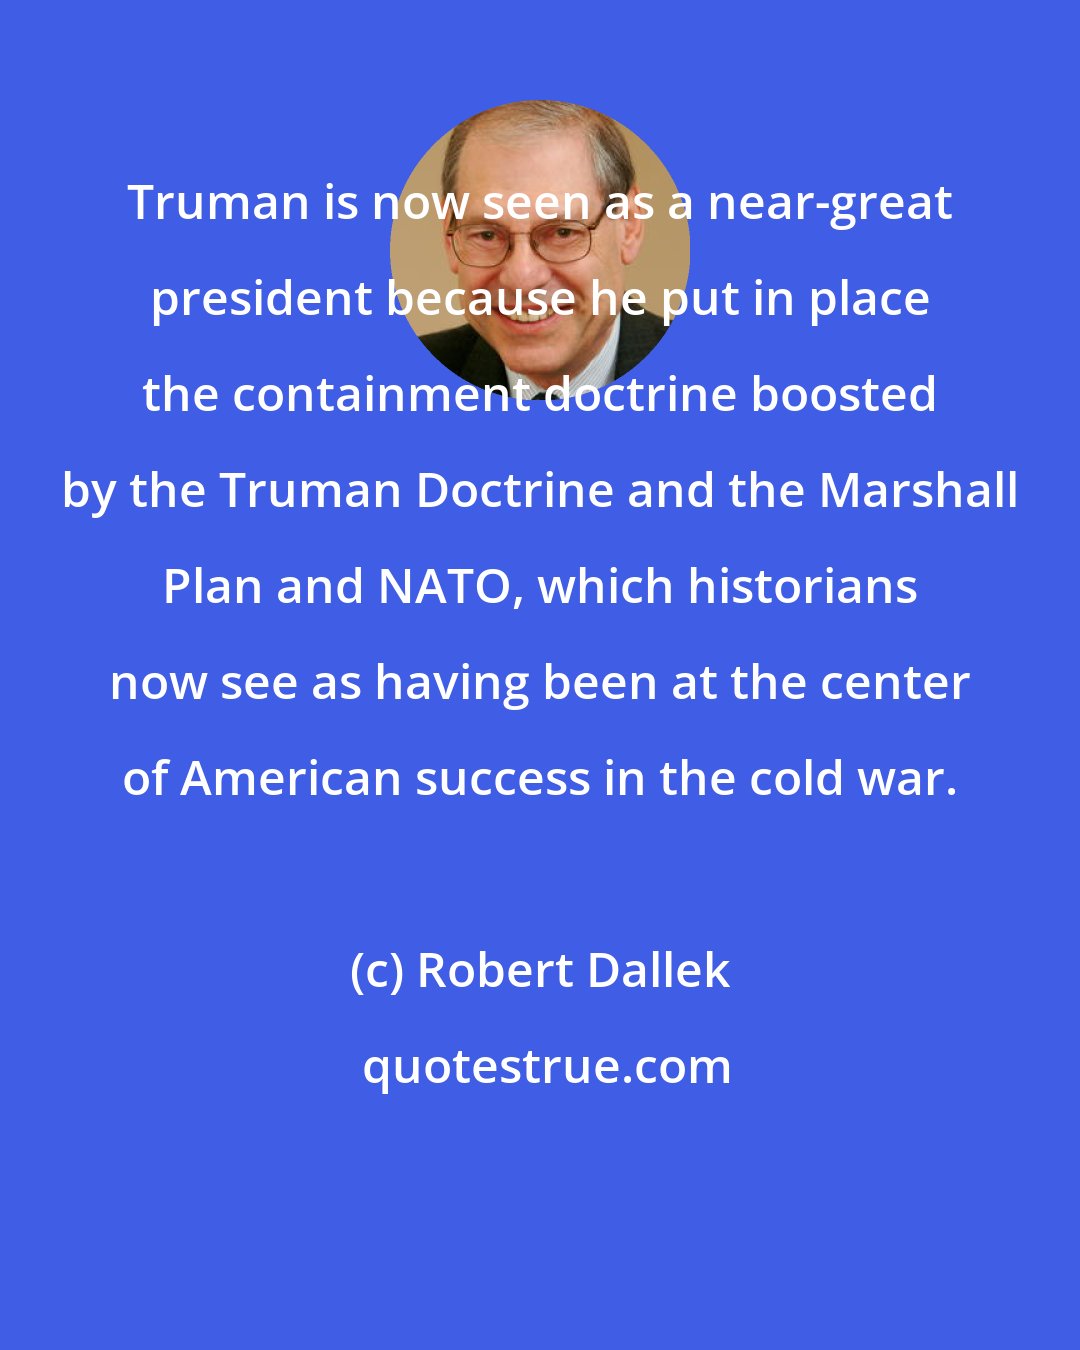 Robert Dallek: Truman is now seen as a near-great president because he put in place the containment doctrine boosted by the Truman Doctrine and the Marshall Plan and NATO, which historians now see as having been at the center of American success in the cold war.